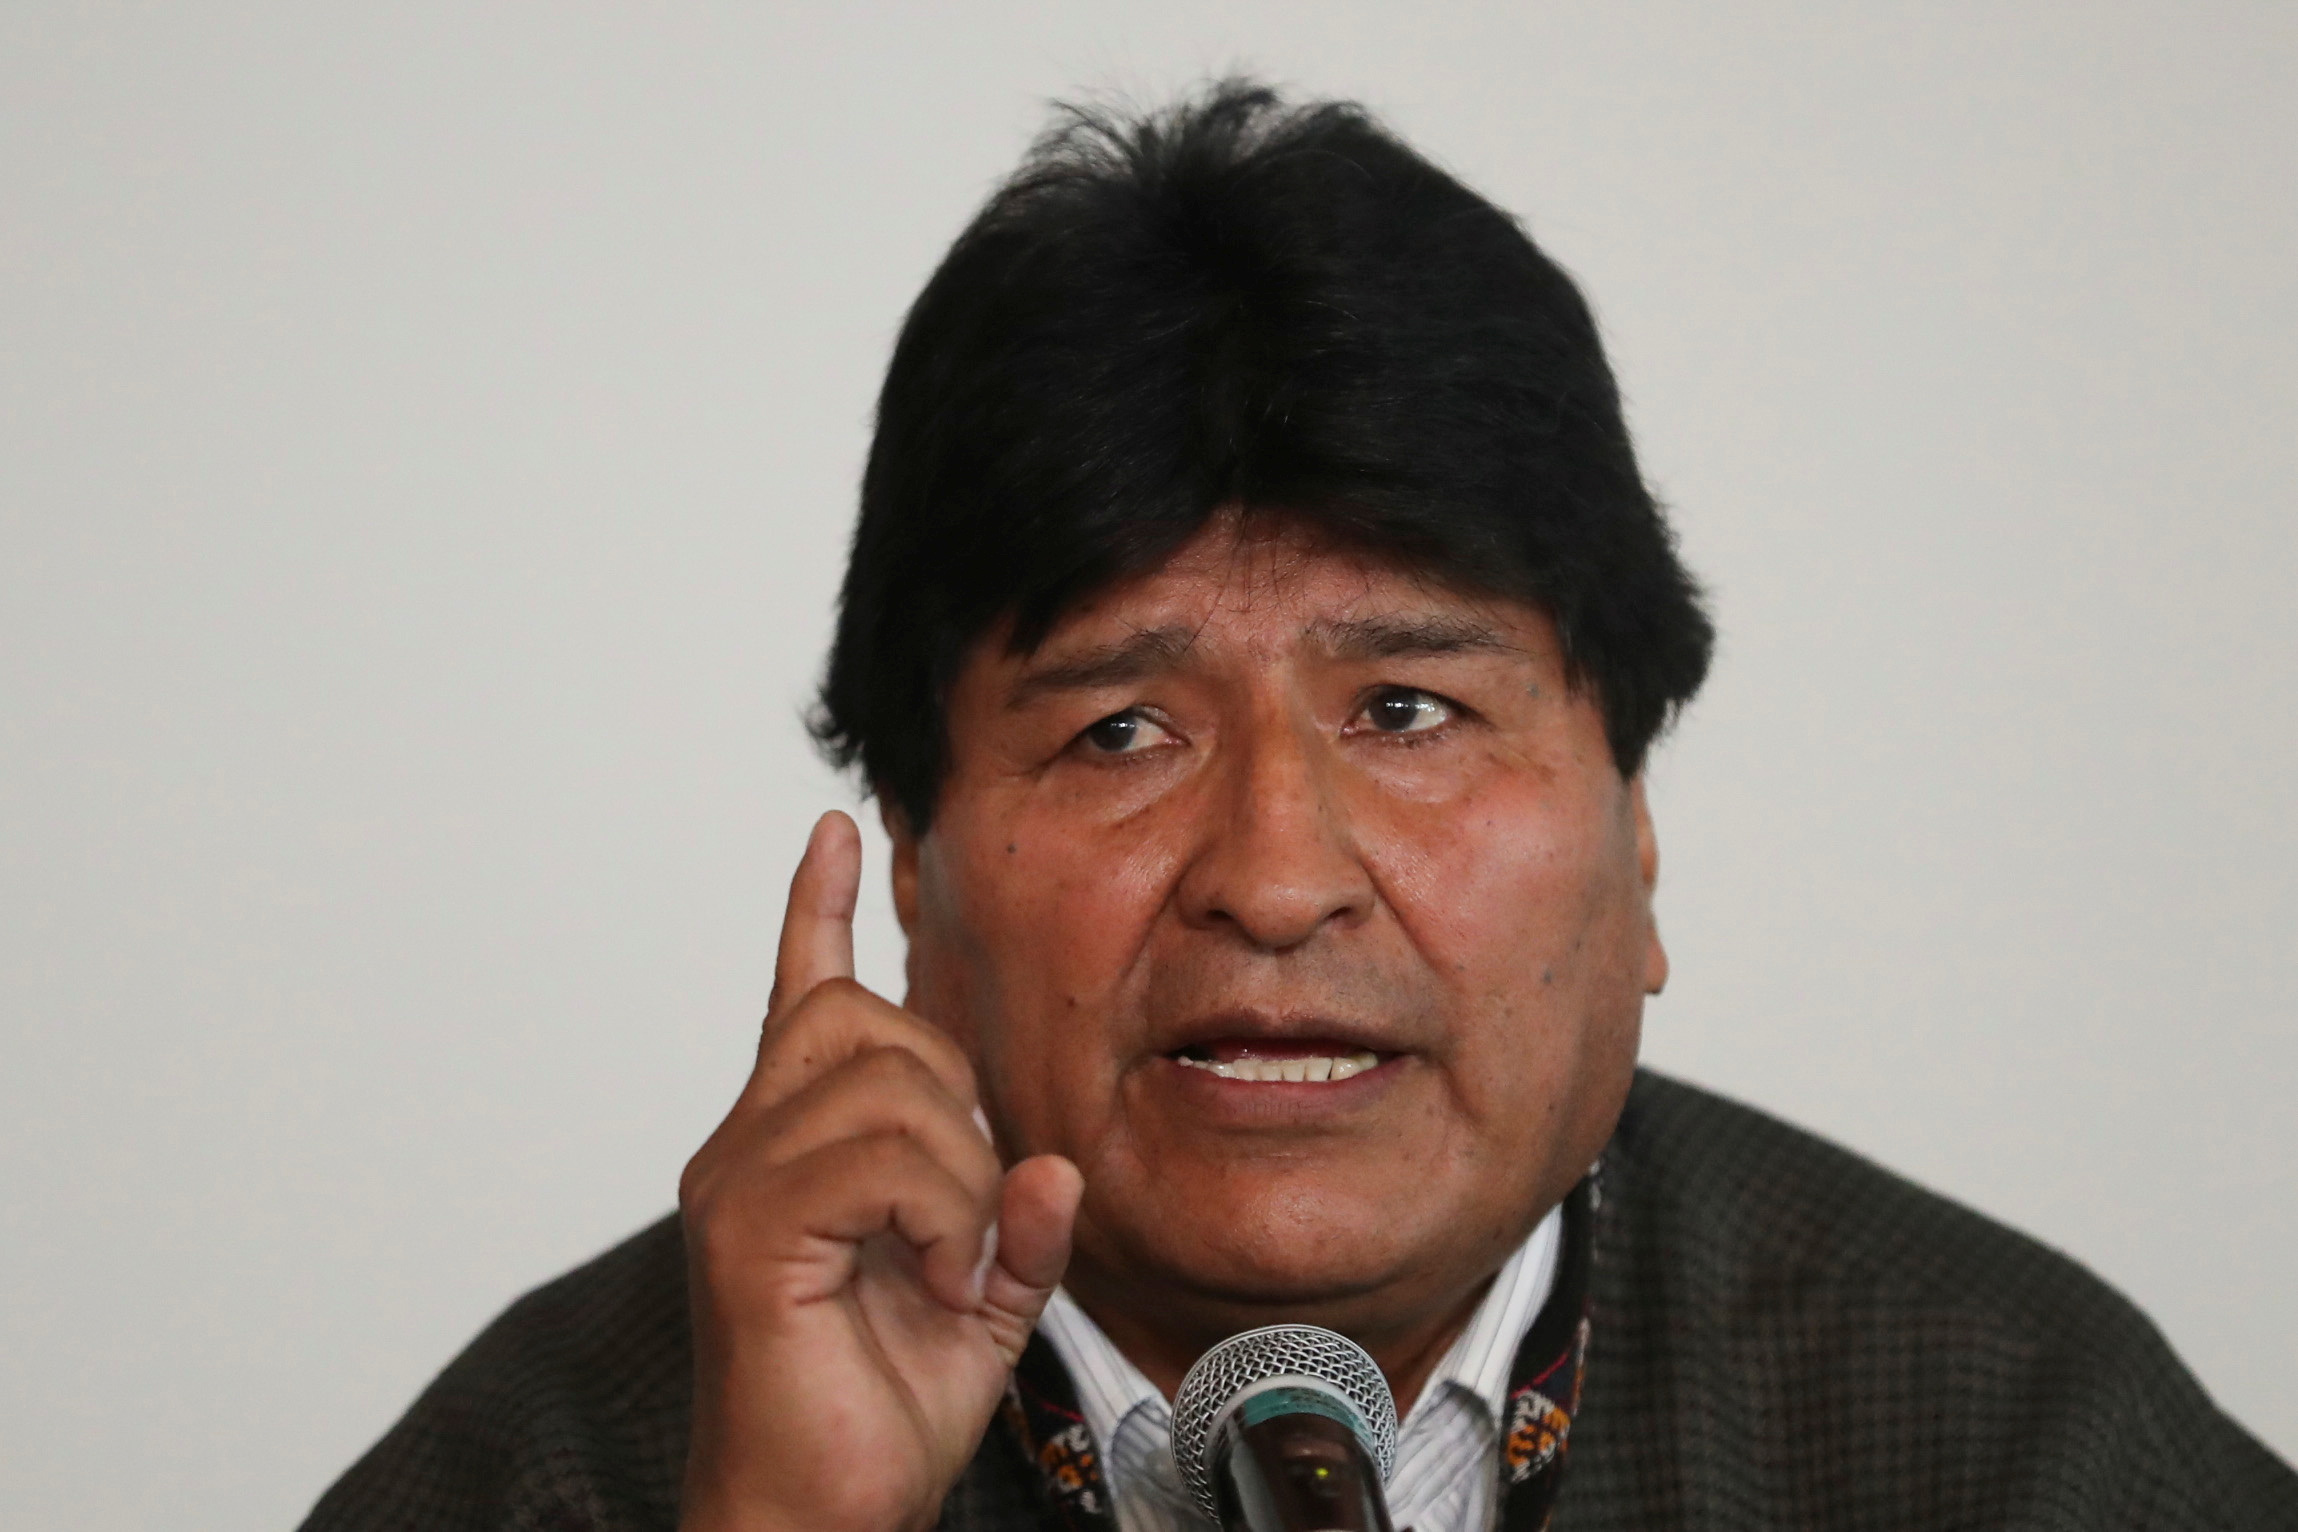 Bolivia's former President Evo Morales attends a news conference in Mexico City